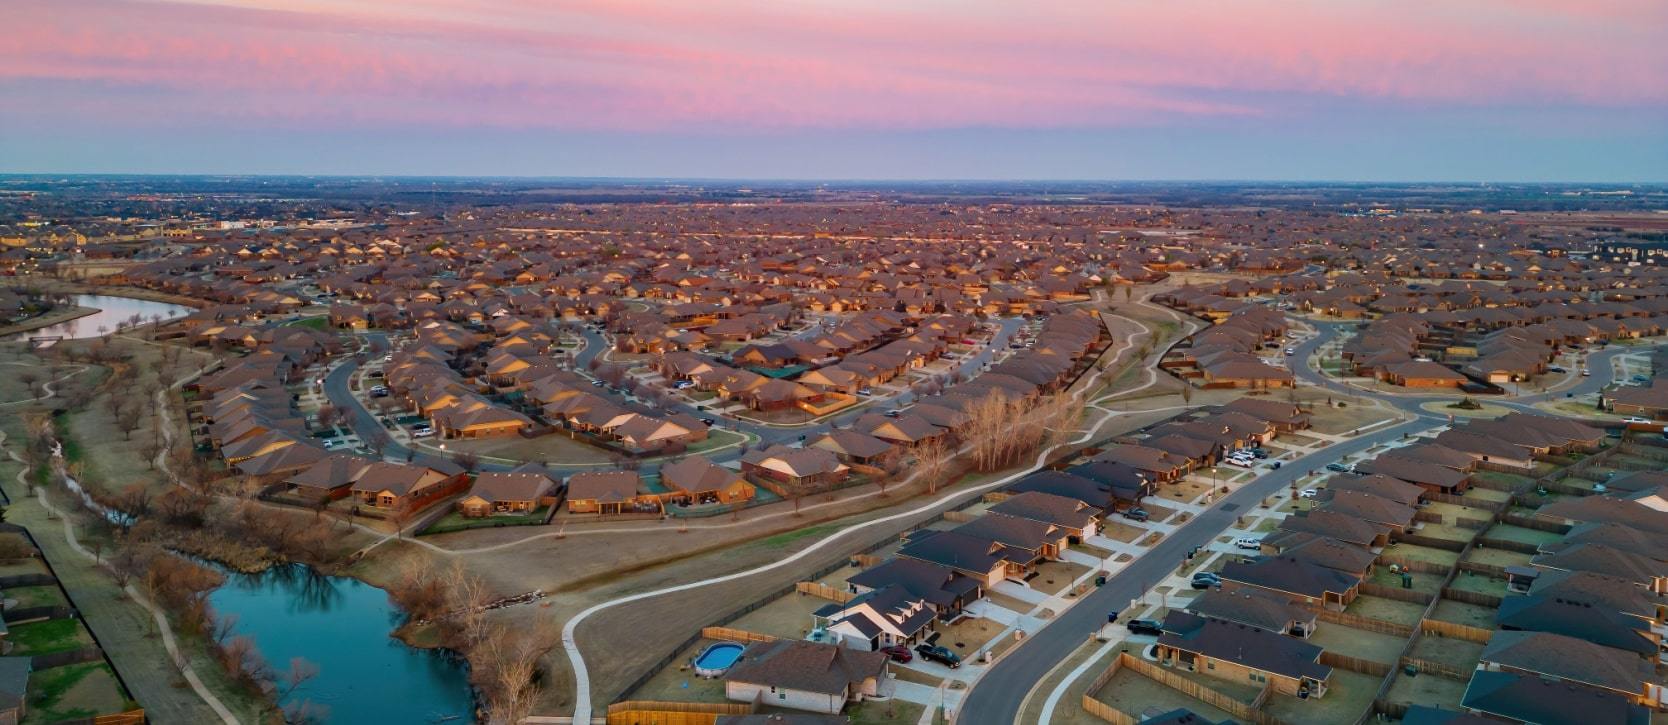 Aerial view over a residential neighborhood in Oklahoma City